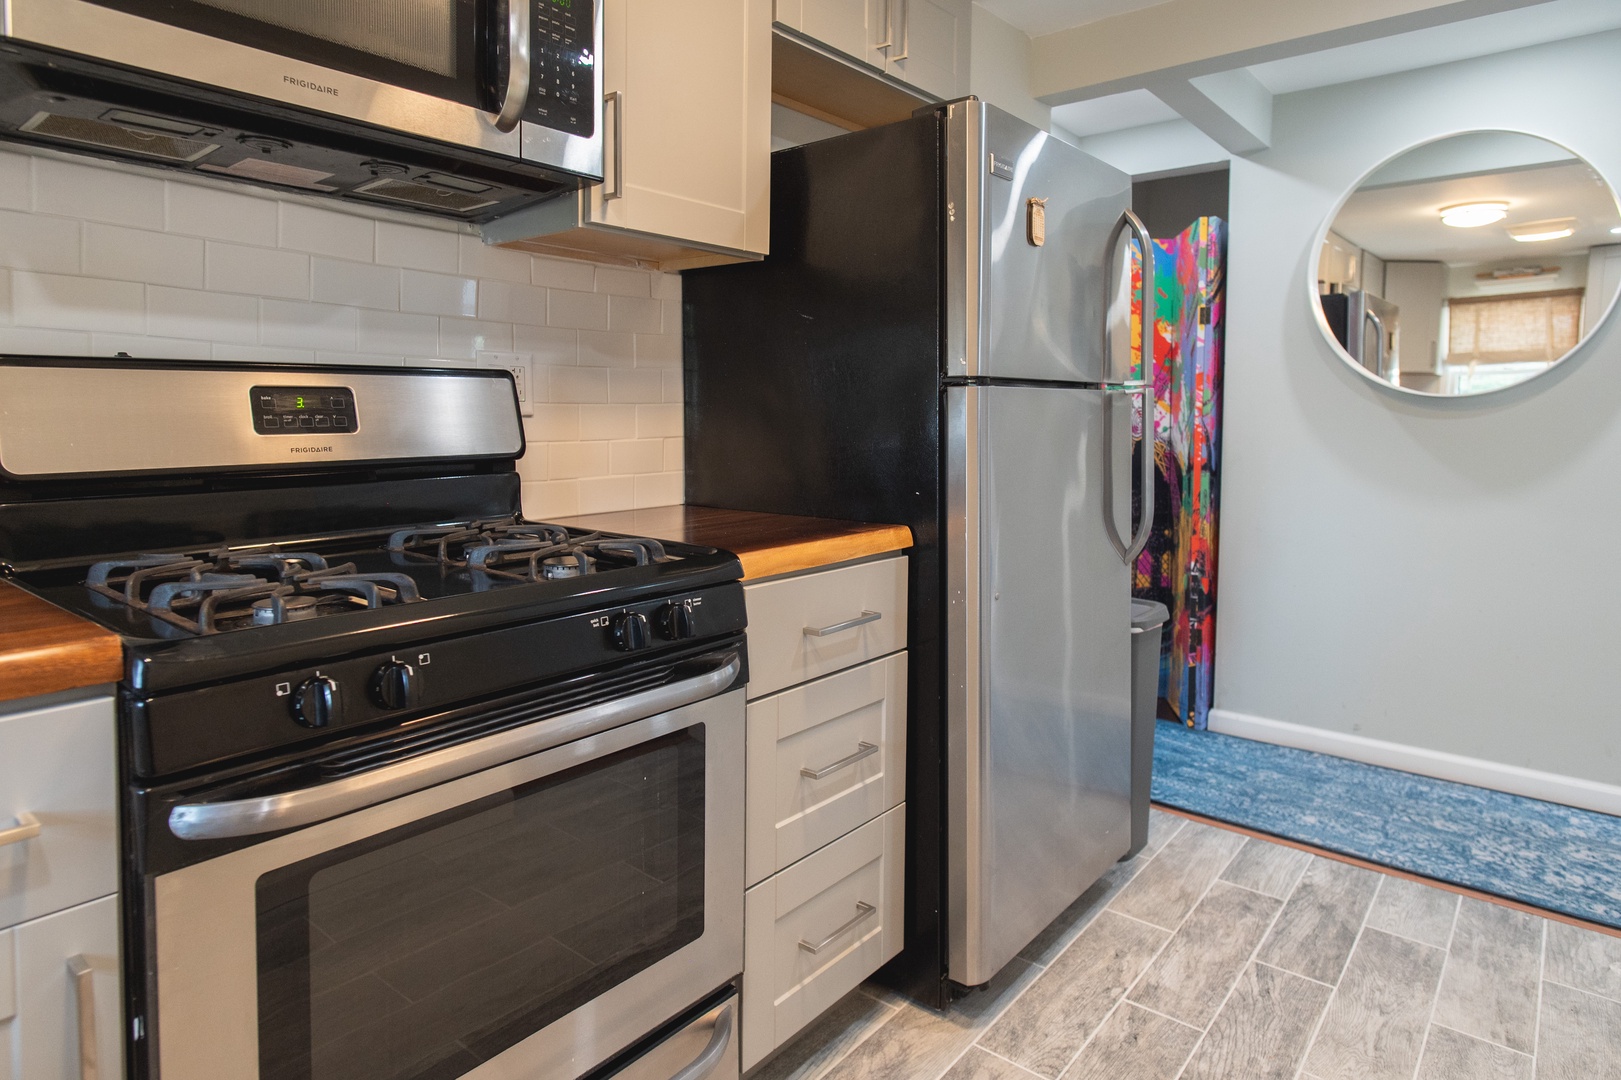 The apartment’s cozy kitchen offers ample space & all the comforts of home